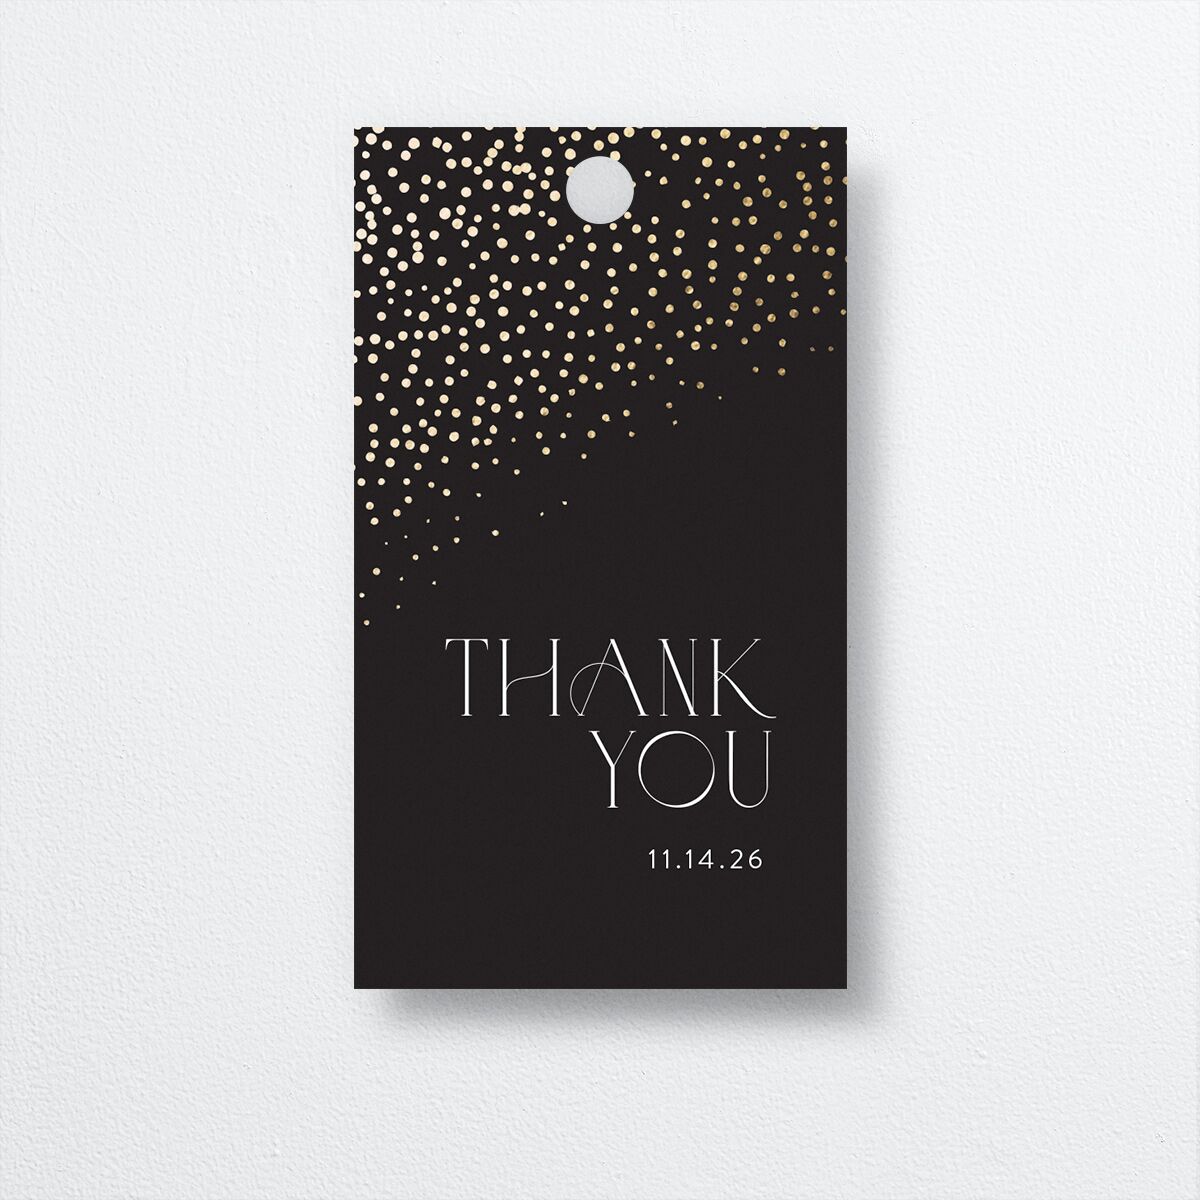 Sweeping Sparkles Favor Gift Tags back in Black